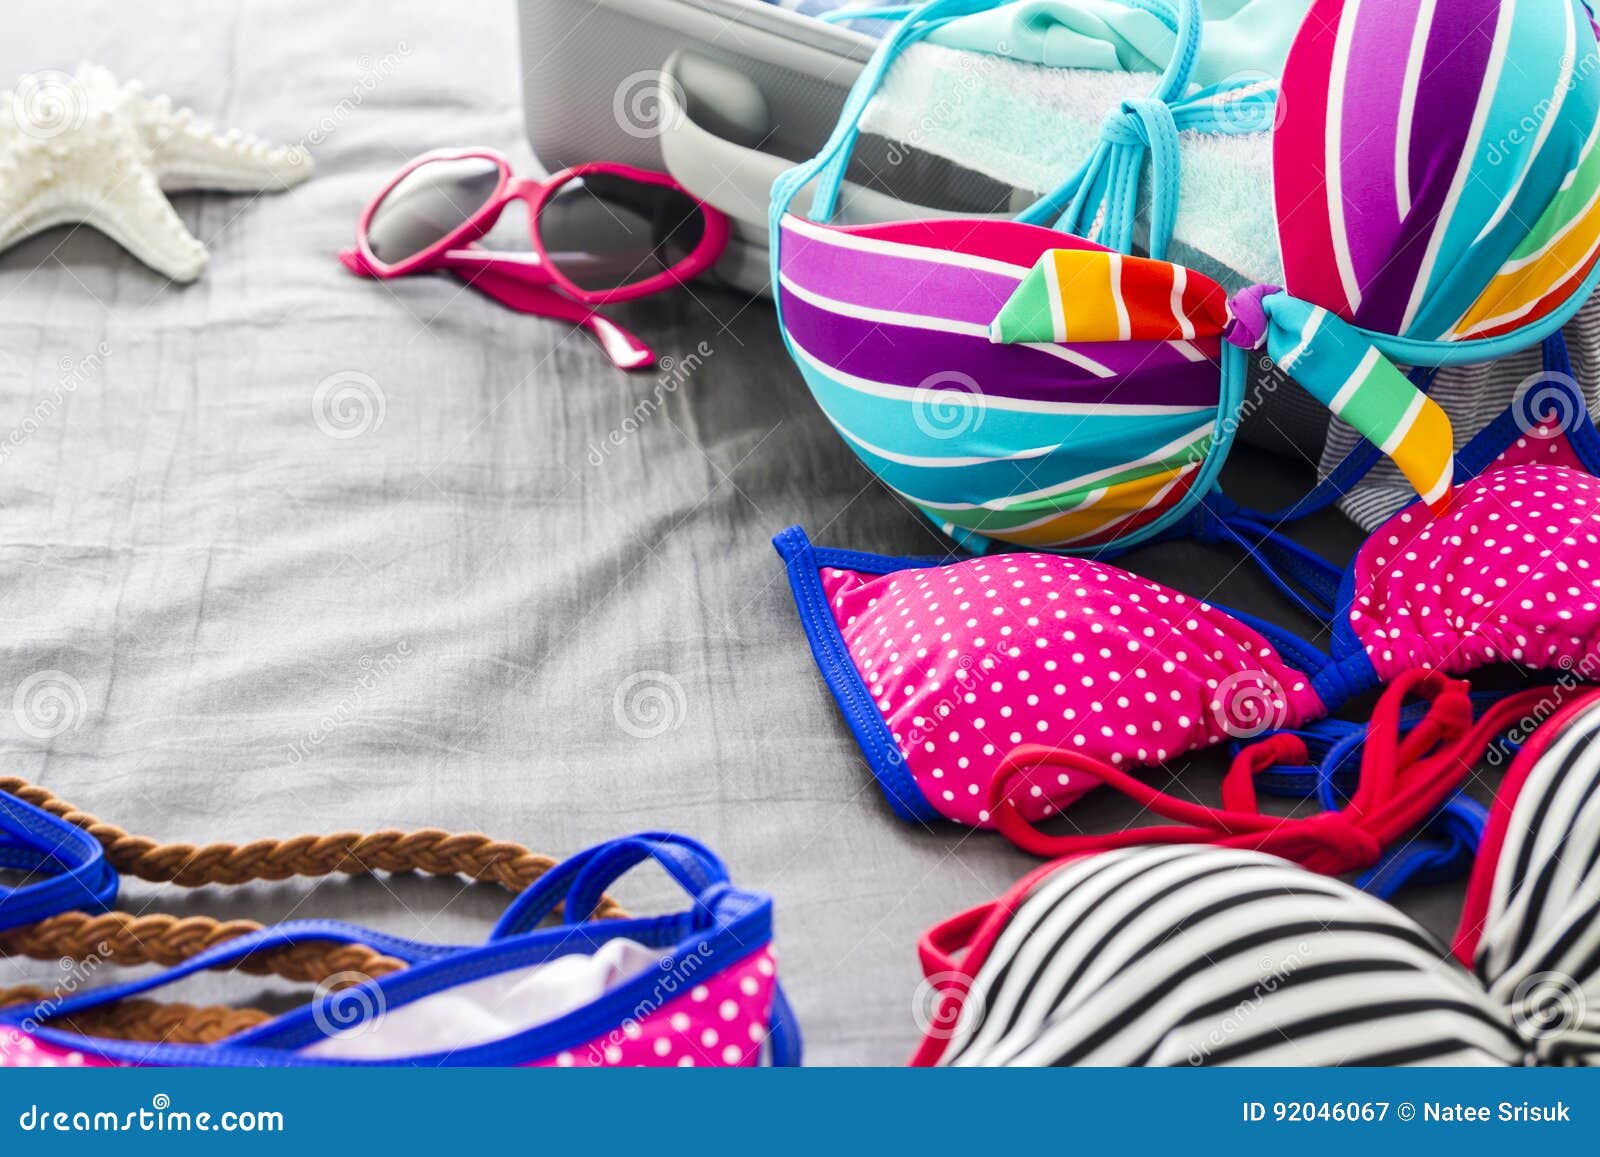 Bikinis and Clothes in Luggage on the Bed Stock Image - Image of ...